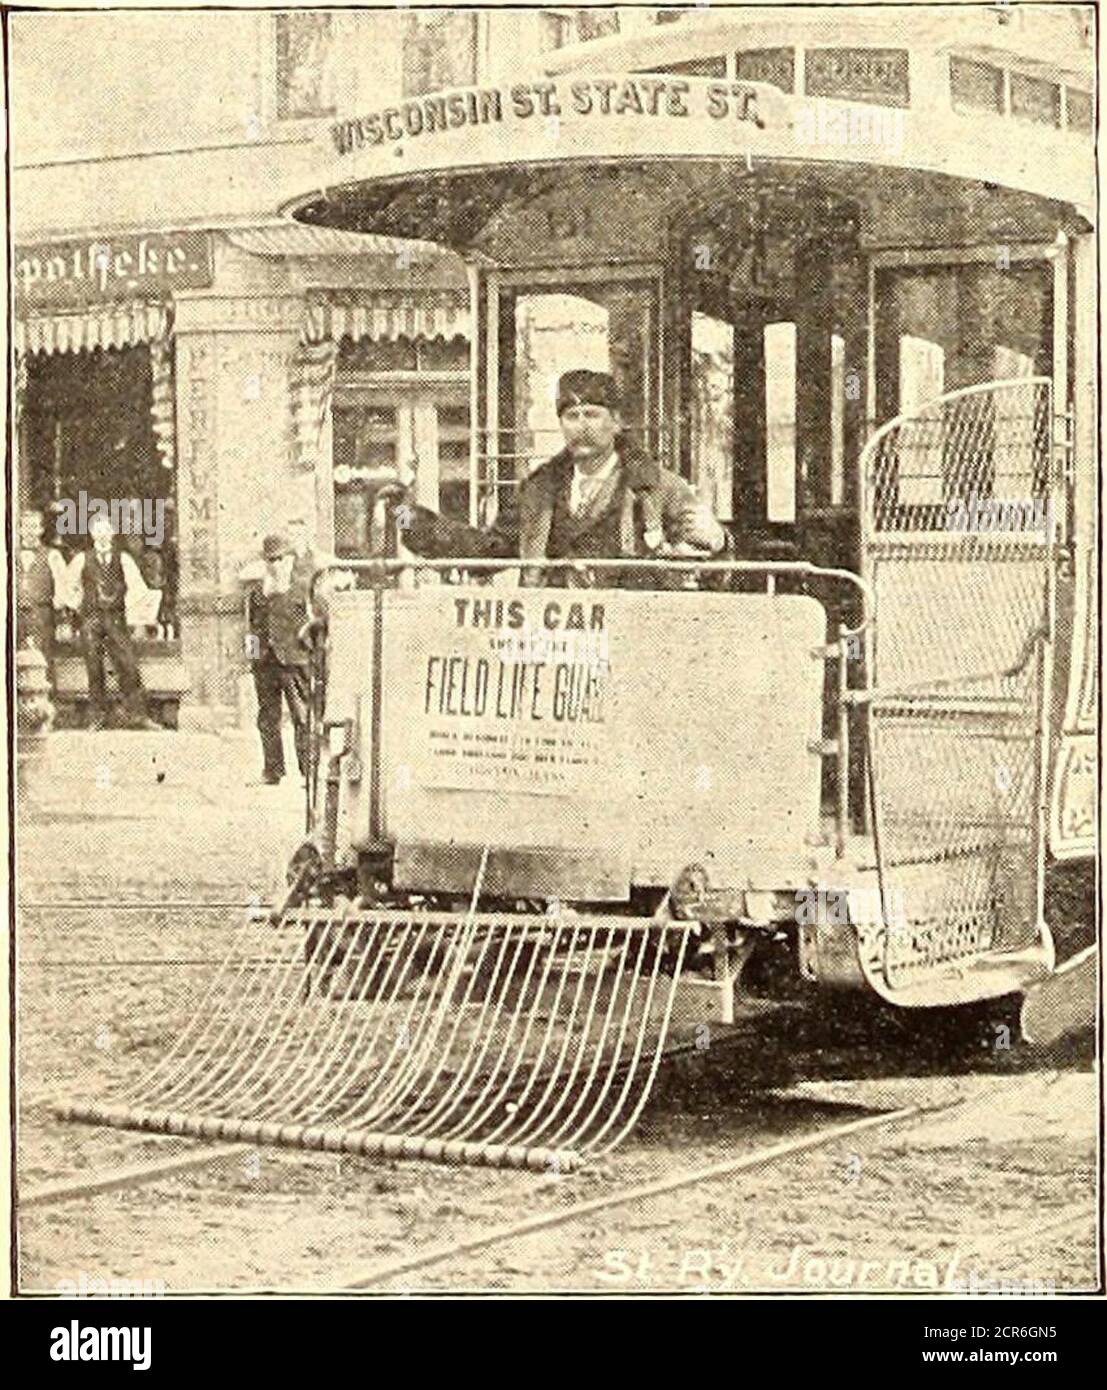 The Street railway journal . nd you can make a perfectall-rail, metallic  return circuit. Can be furnish-ed any length or size, from o to oooo. H. R.  KEITHLEY, 107-109 Lake St.,